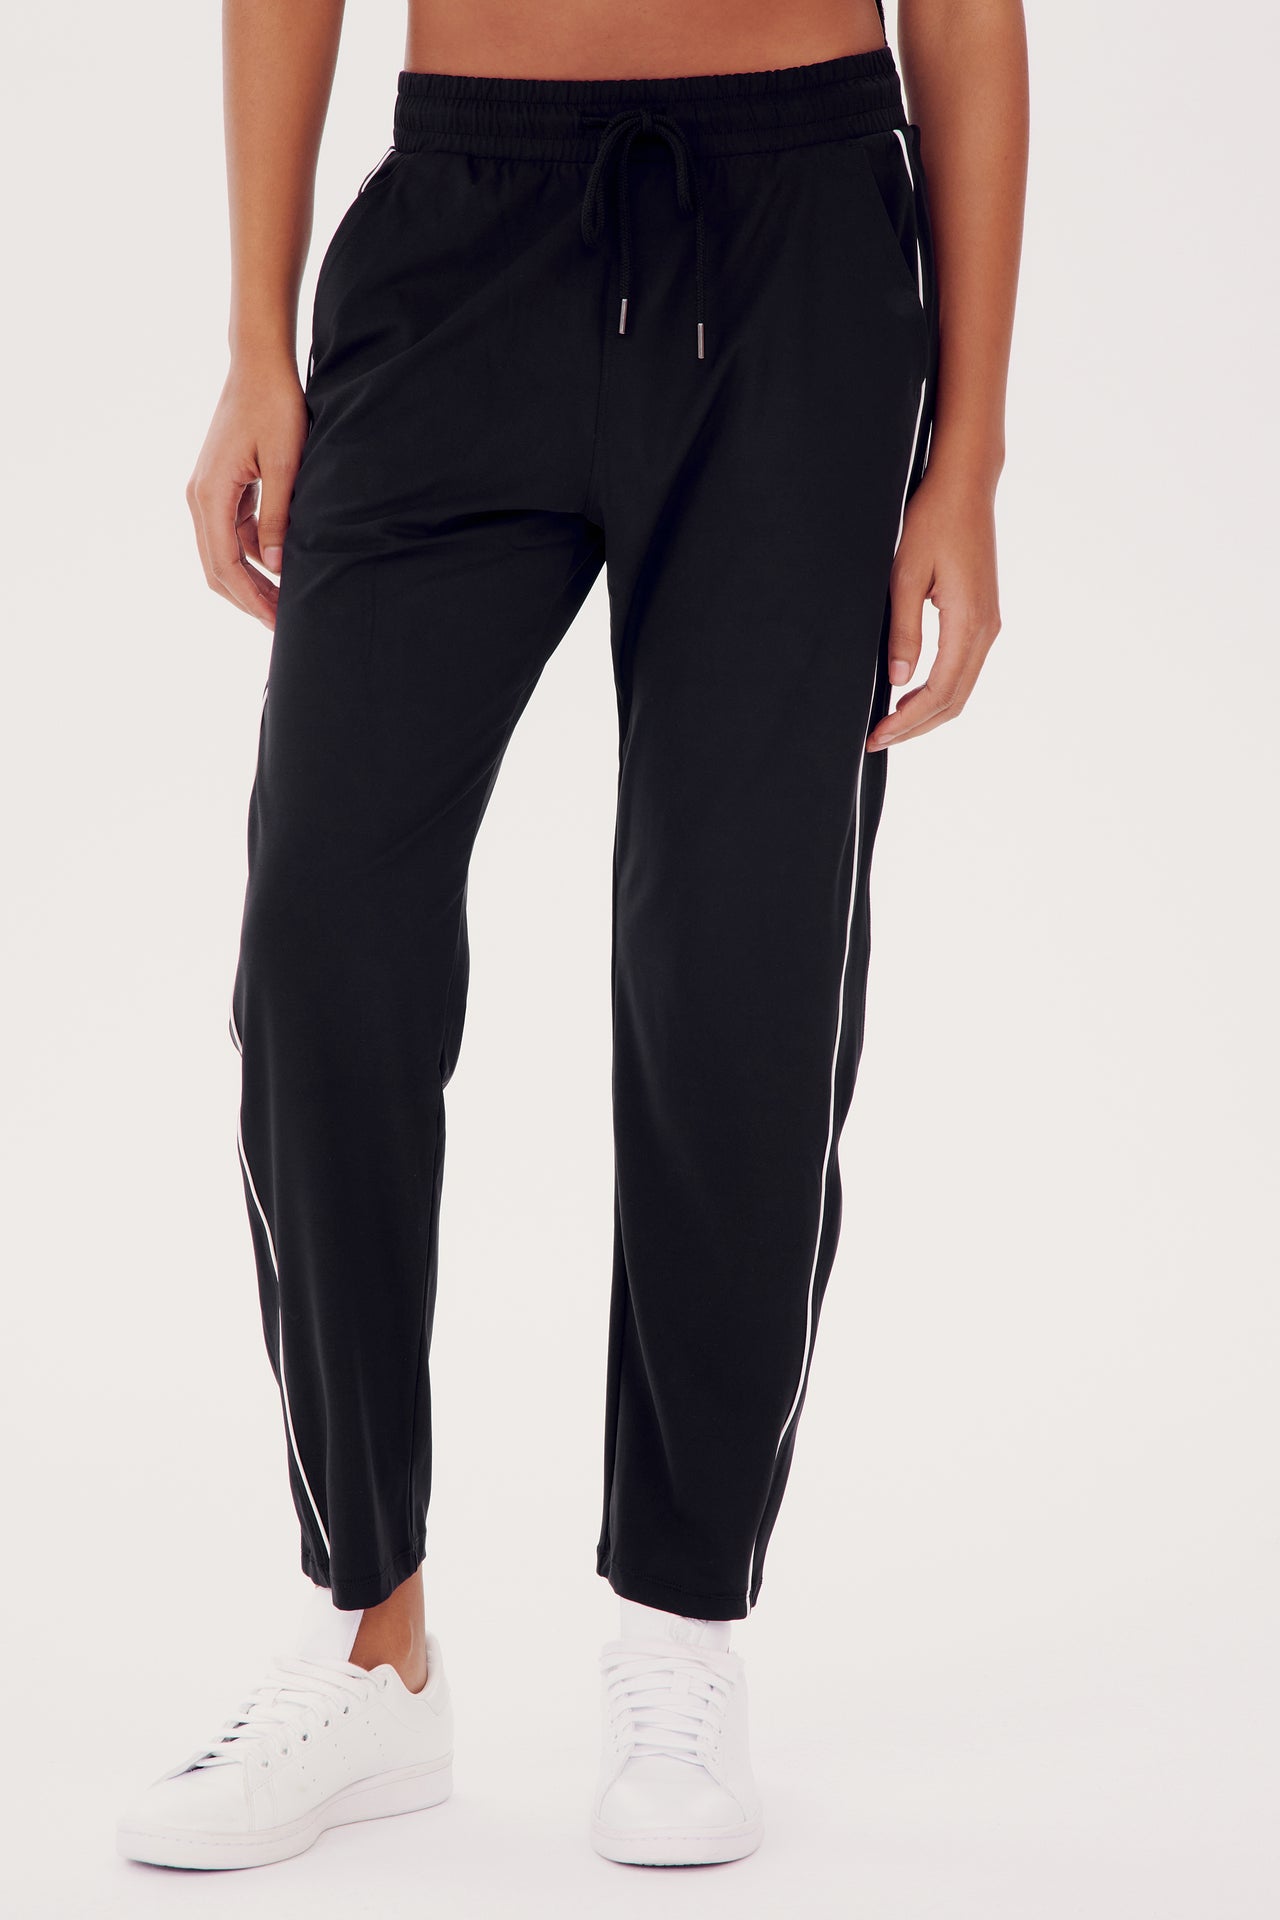 A person wearing SPLITS59 Lucy Rigor Pant W/Piping in Black with a white stripe on the sides, paired with white sneakers, stands against a plain background.